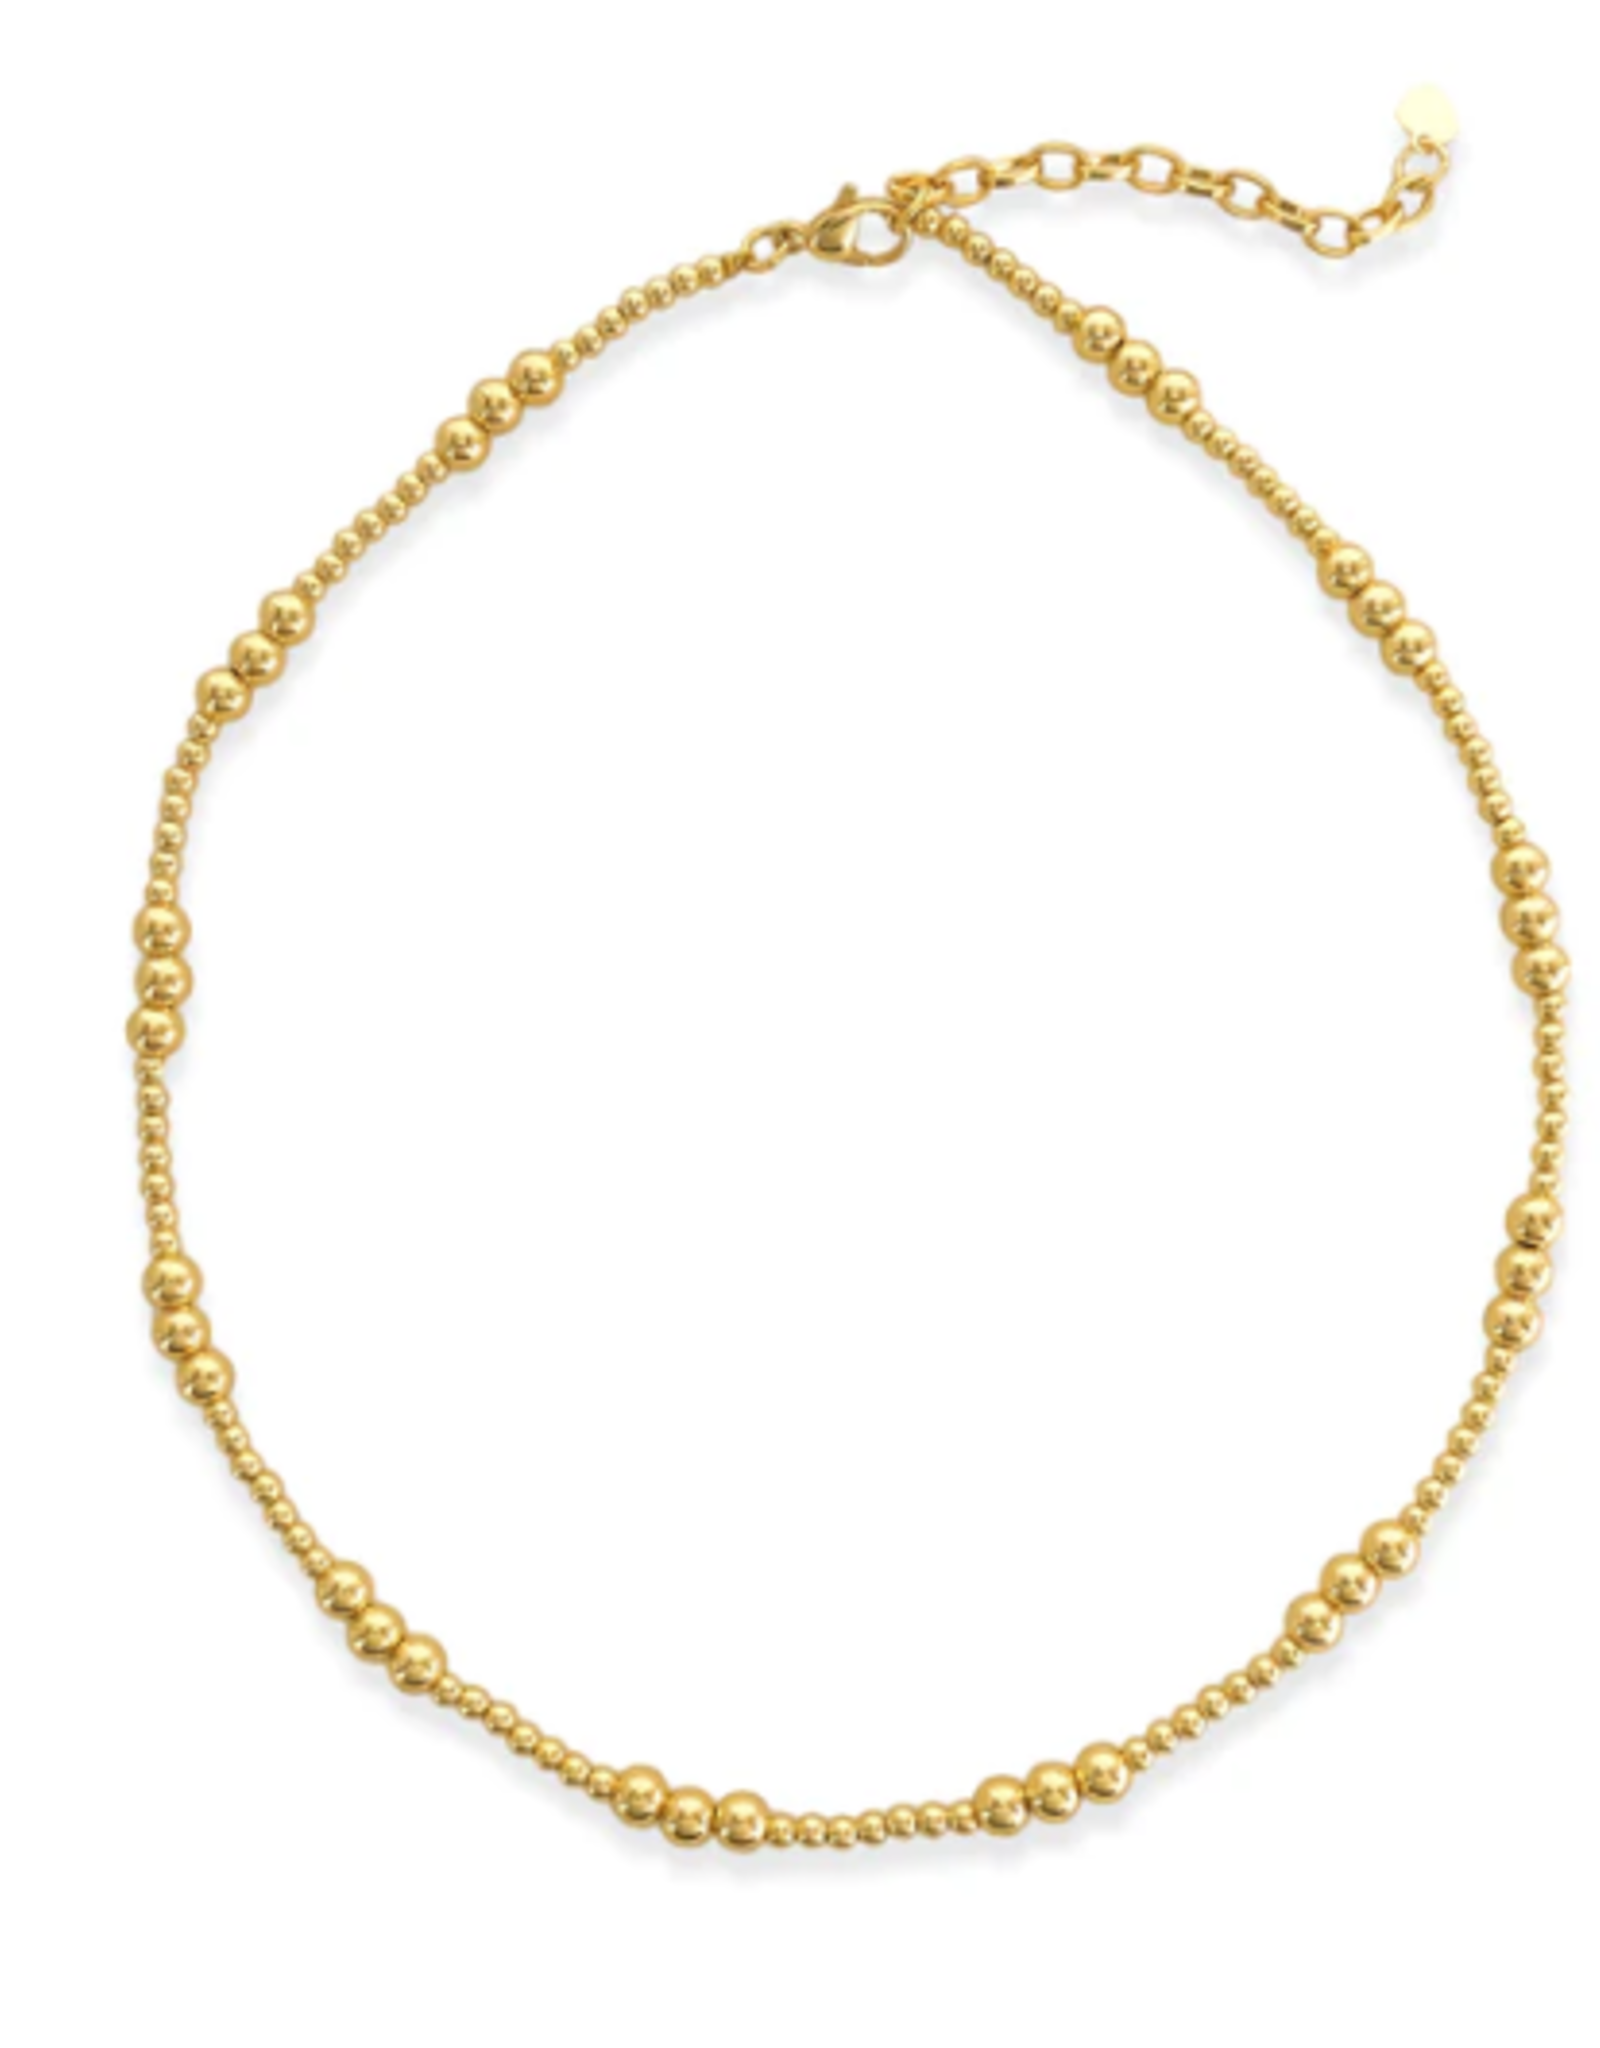 Gold Chain Beaded Necklace